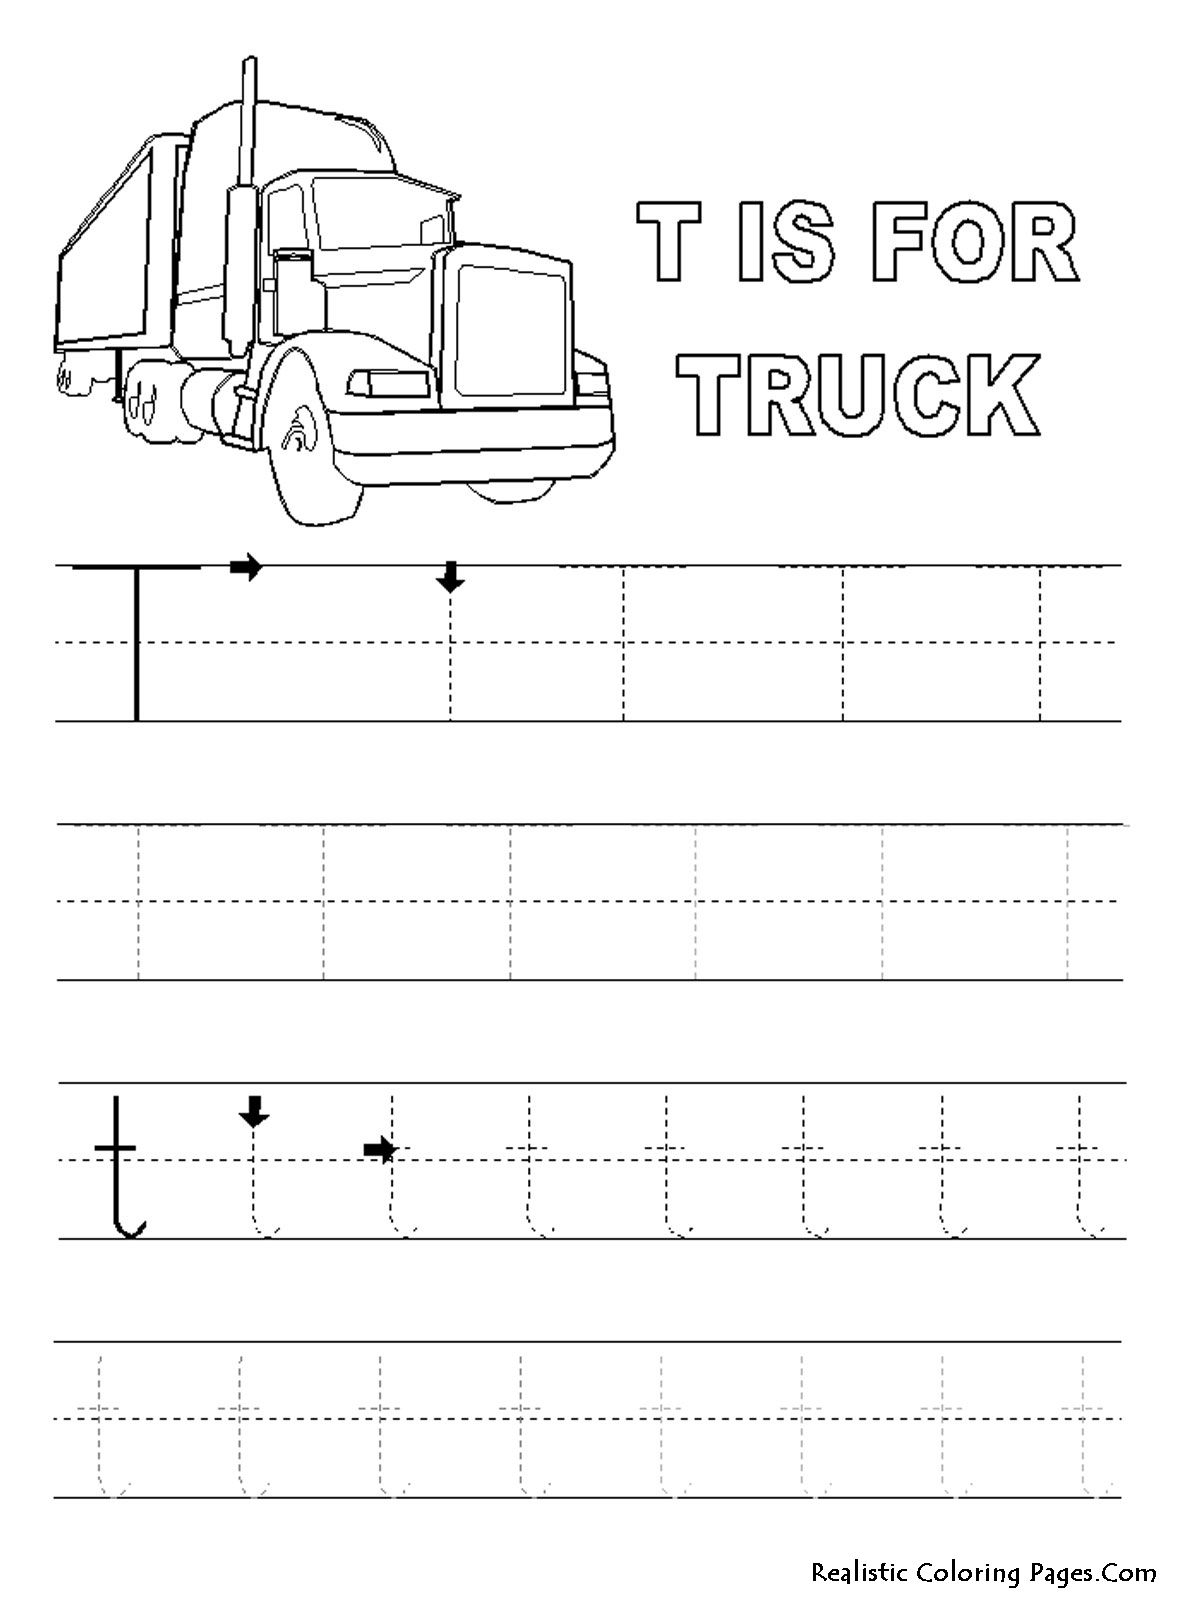 Letter T Worksheets And Coloring Pages For Preschoolers with Letter T Worksheets Prek